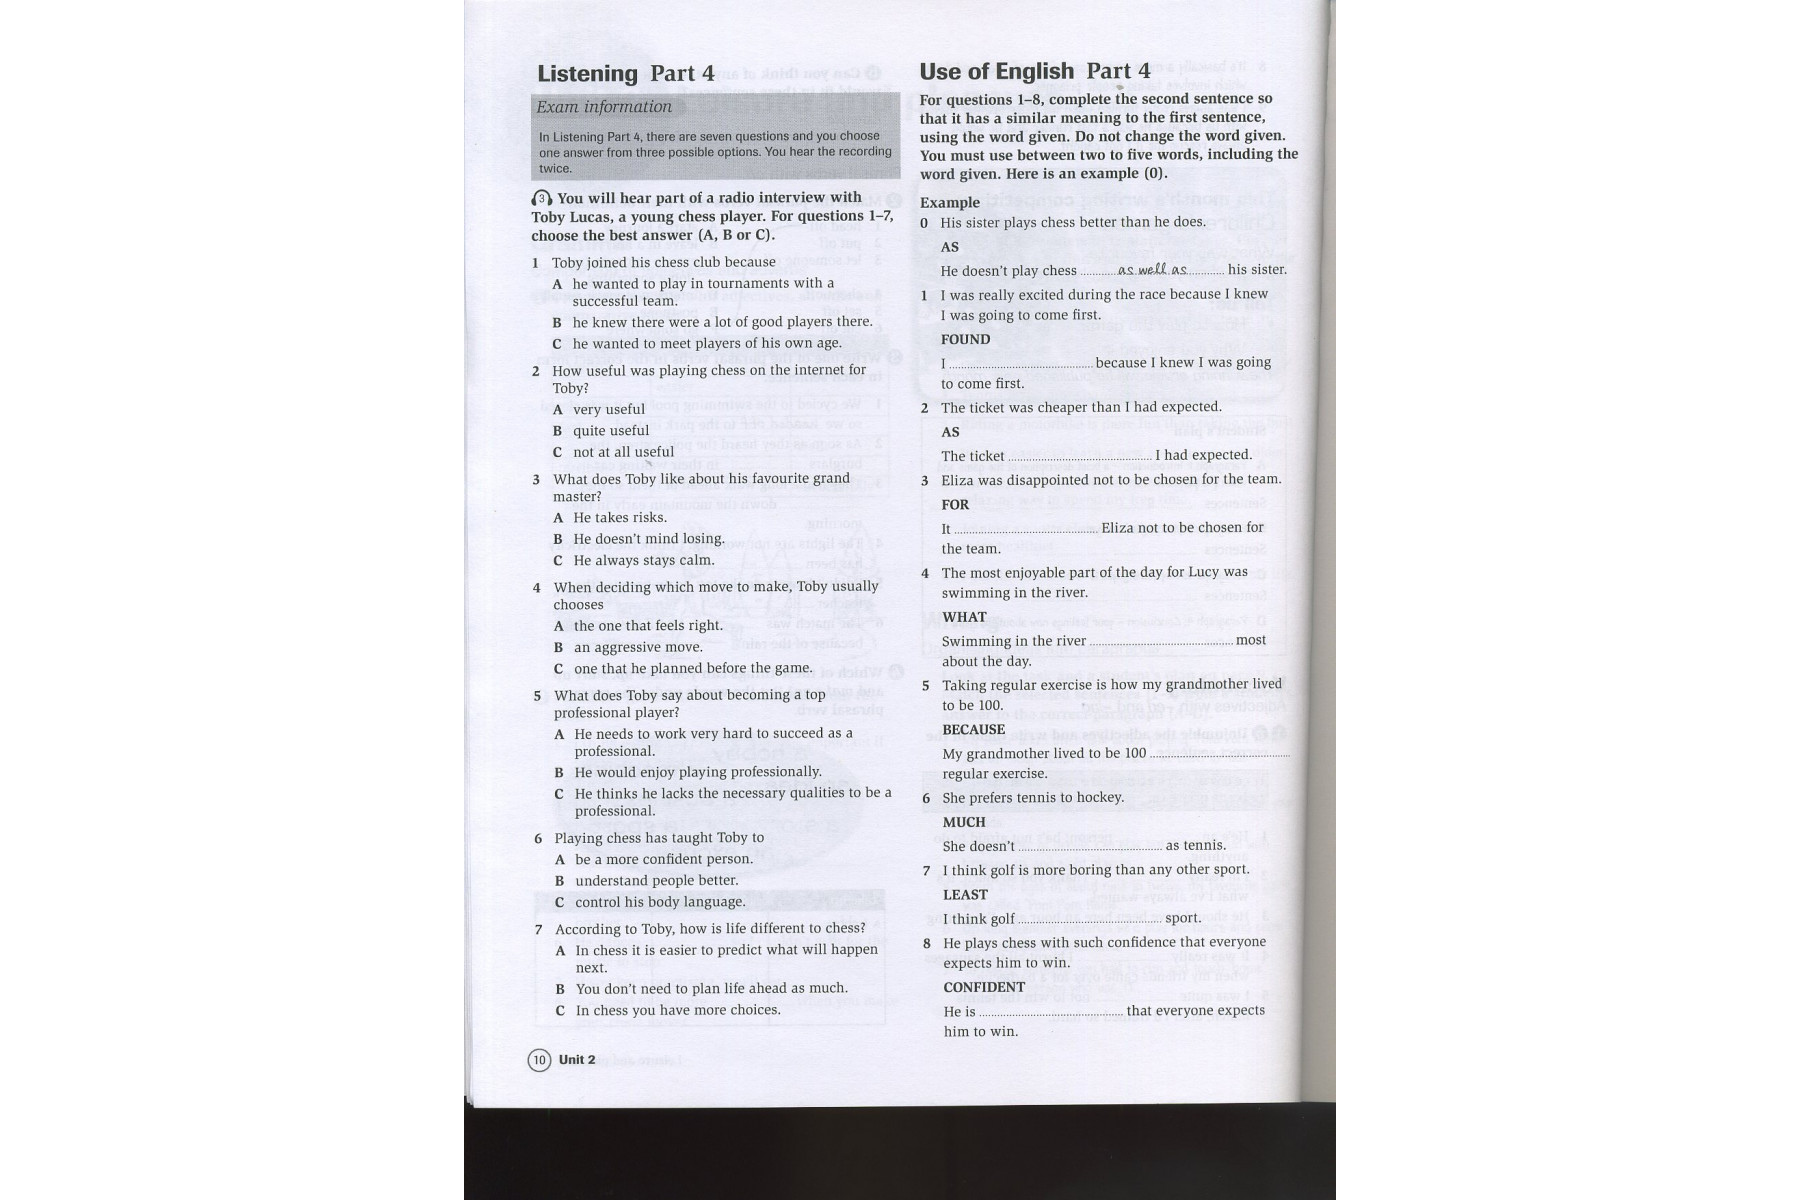 Complete First Certificate Workbook with Answers and Audio CD